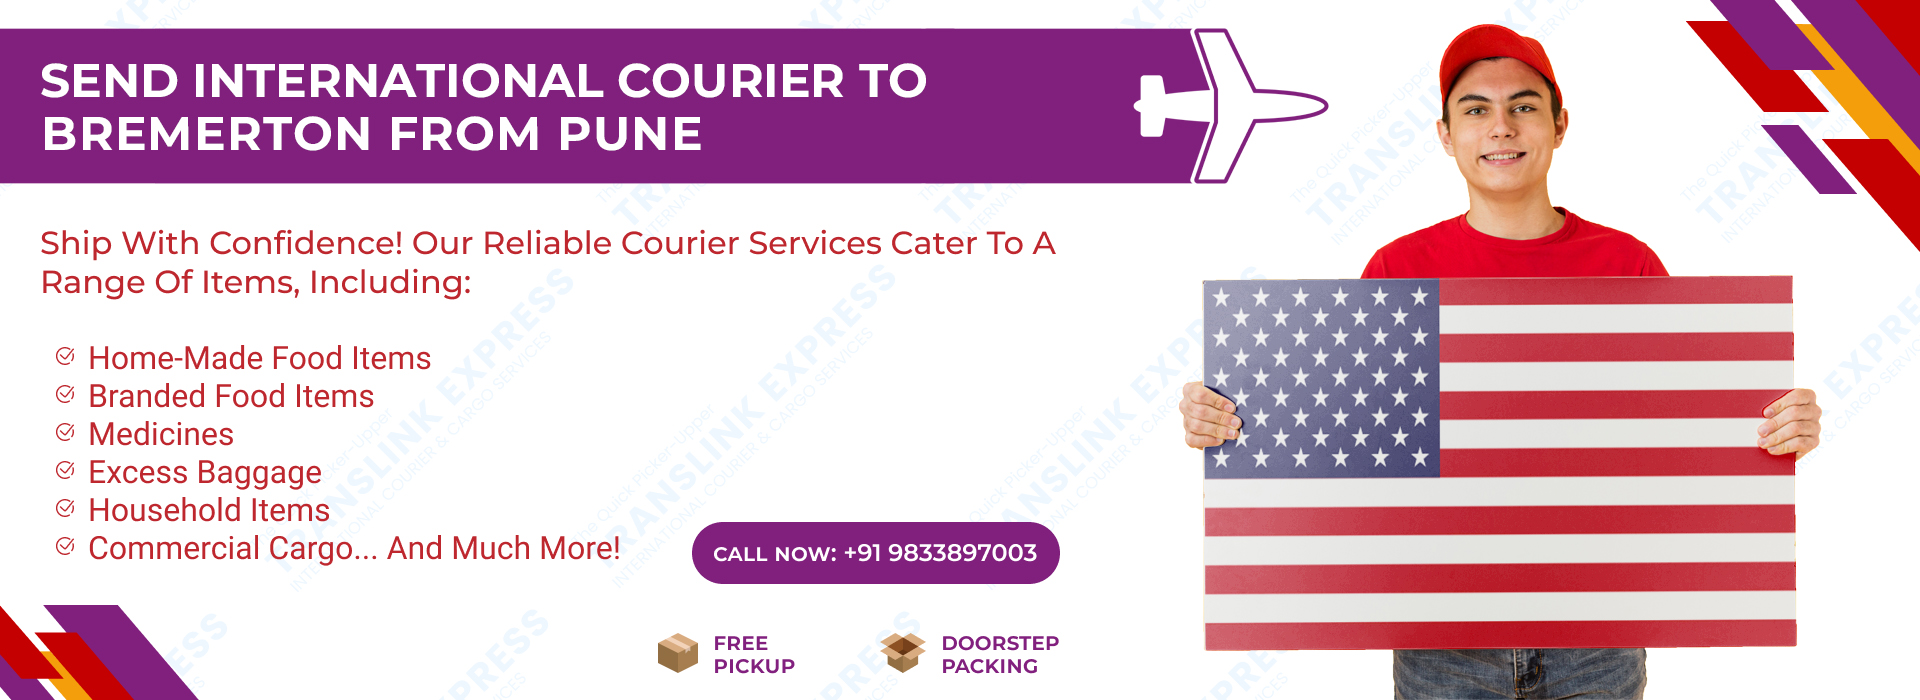 Courier to Bremerton From Pune